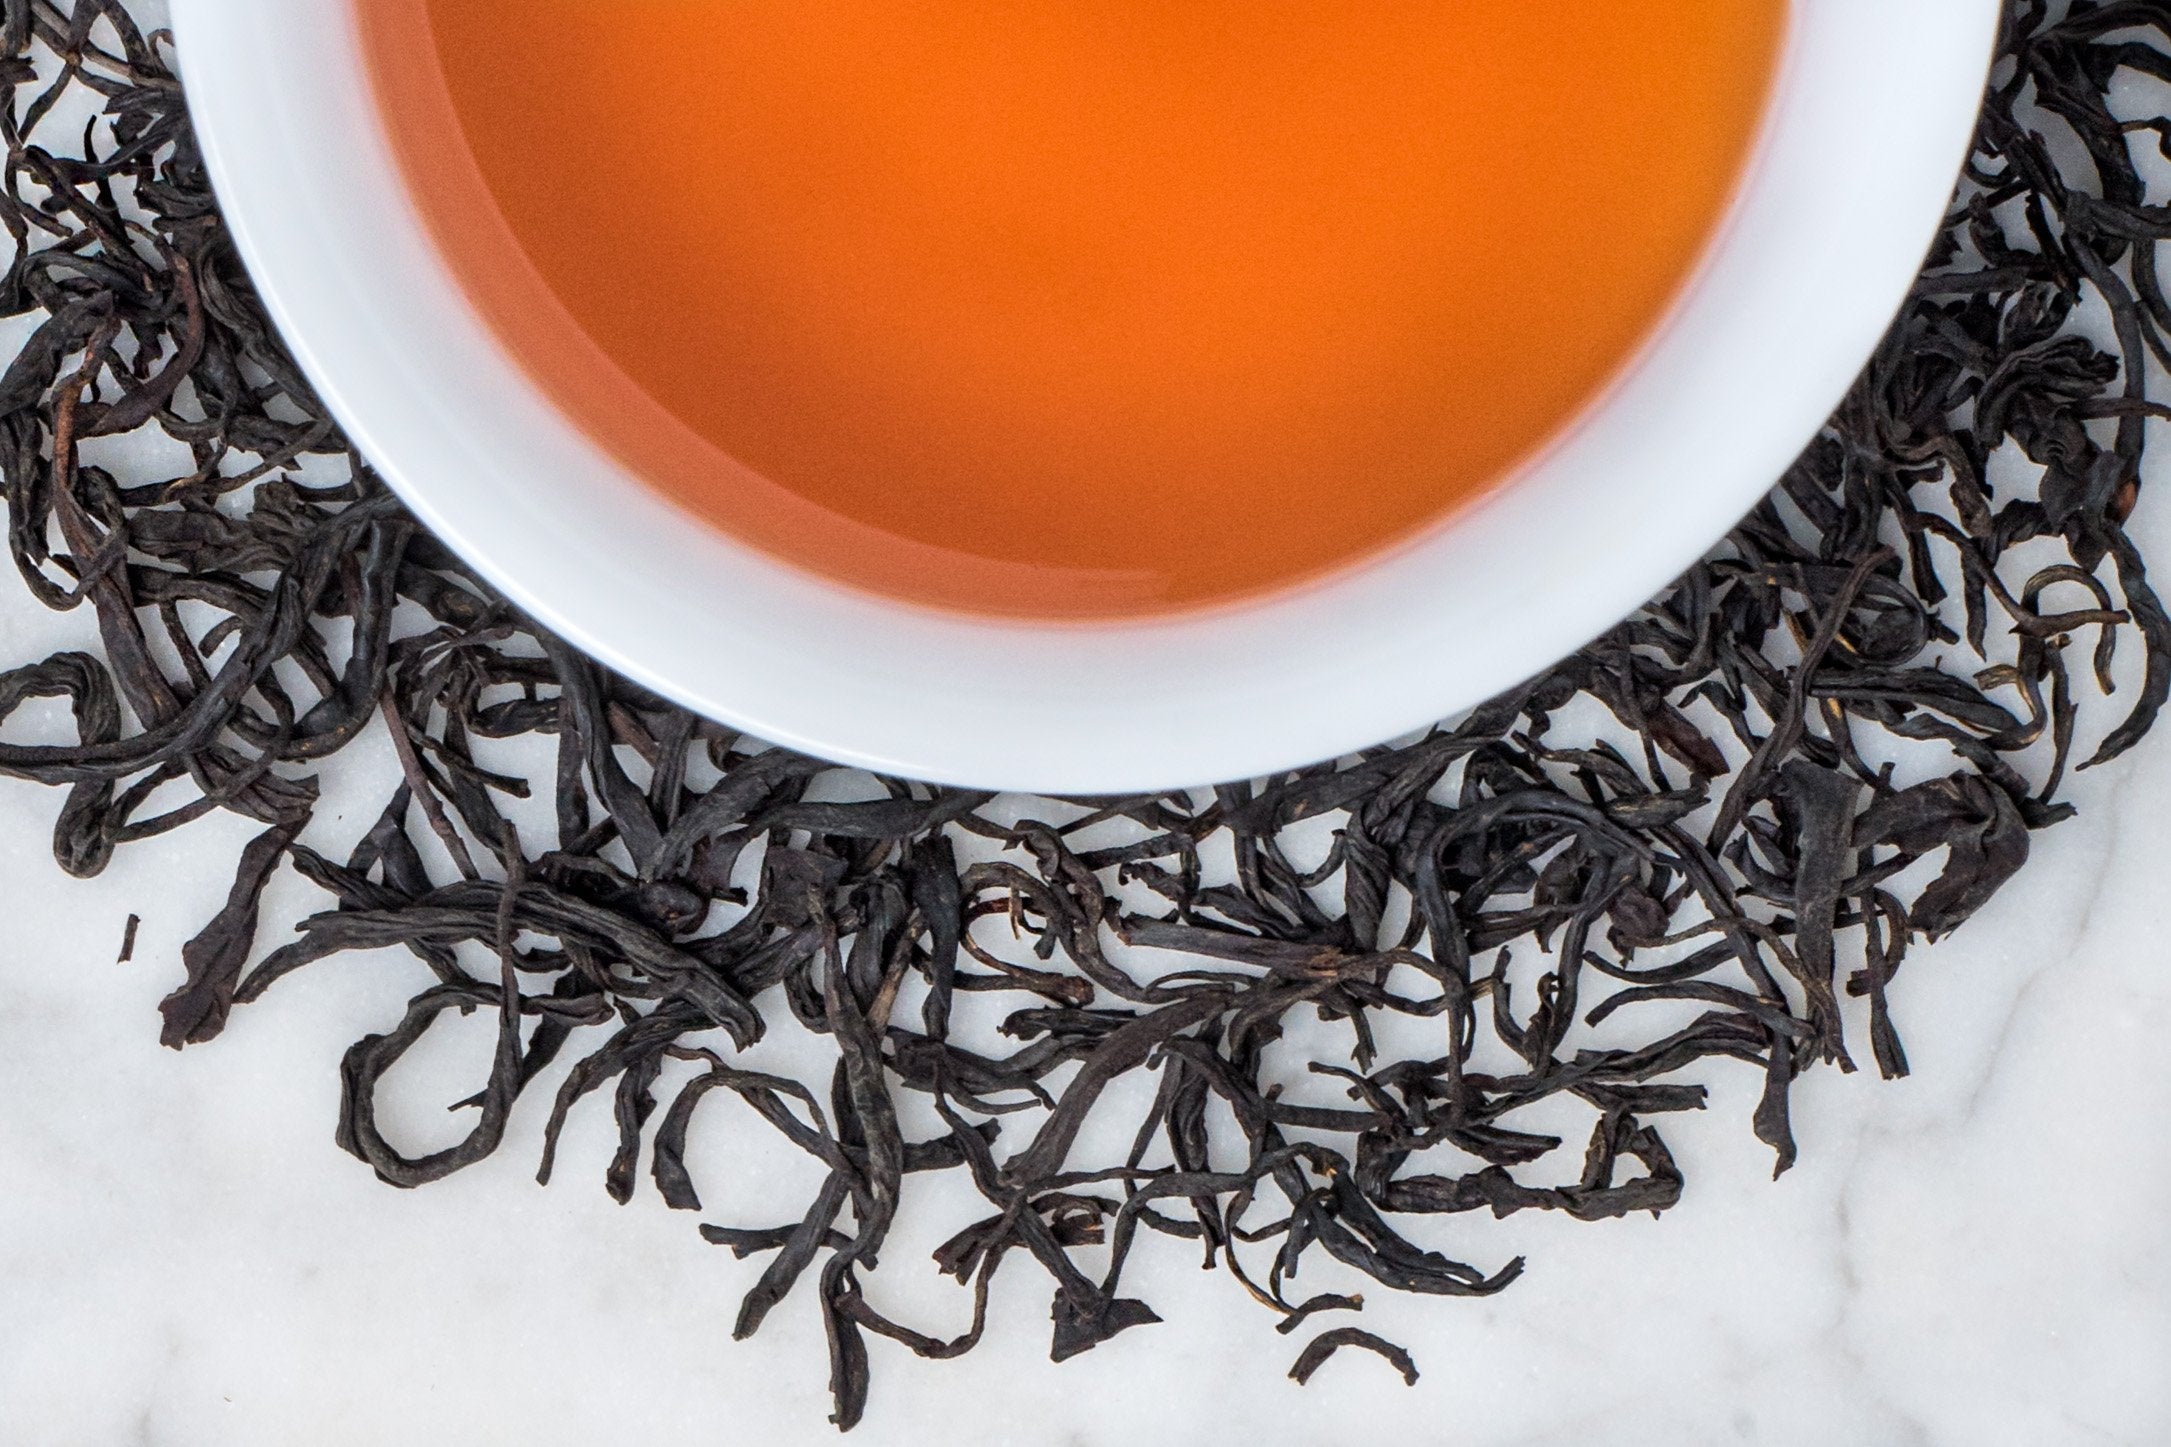 Gently Rolled Whole Black Tea Leaves Surrounding A Cocoa-y And Earthy Cup of Brewed Mao Feng